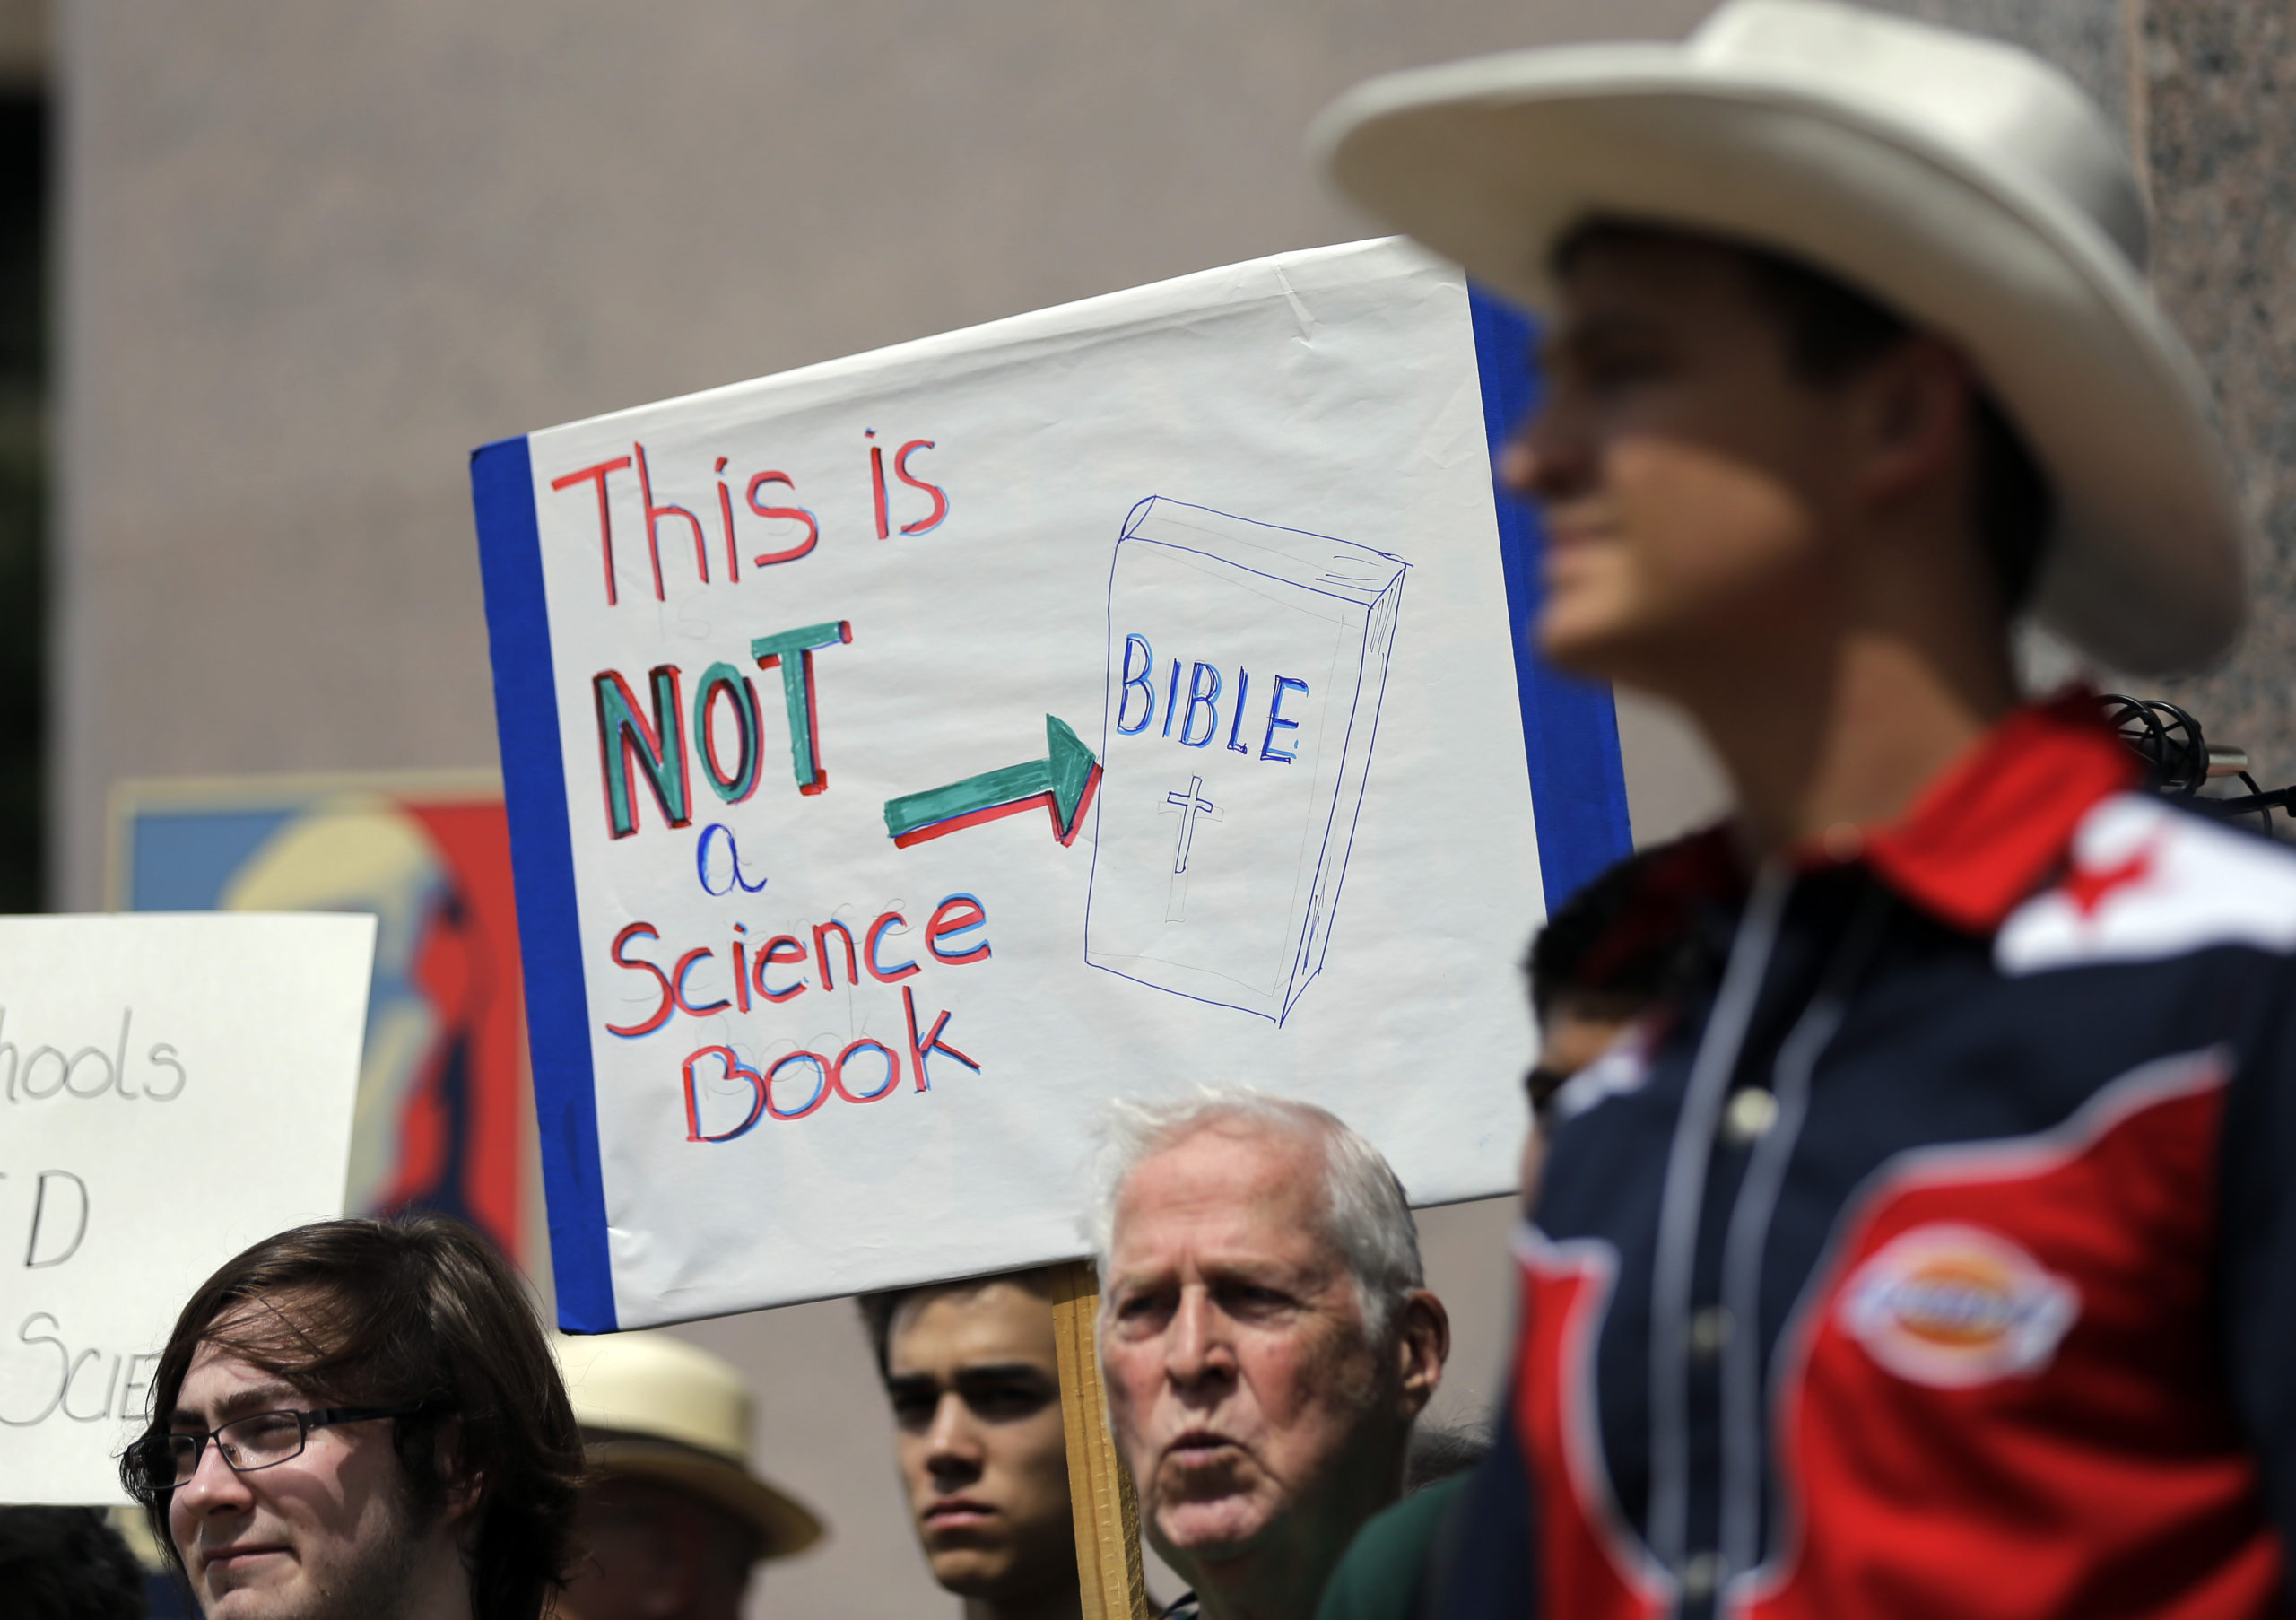 Pro-science supporters rally prior to a State Board of Education public hearing on proposed new science textbooks, in Austin, Texas.